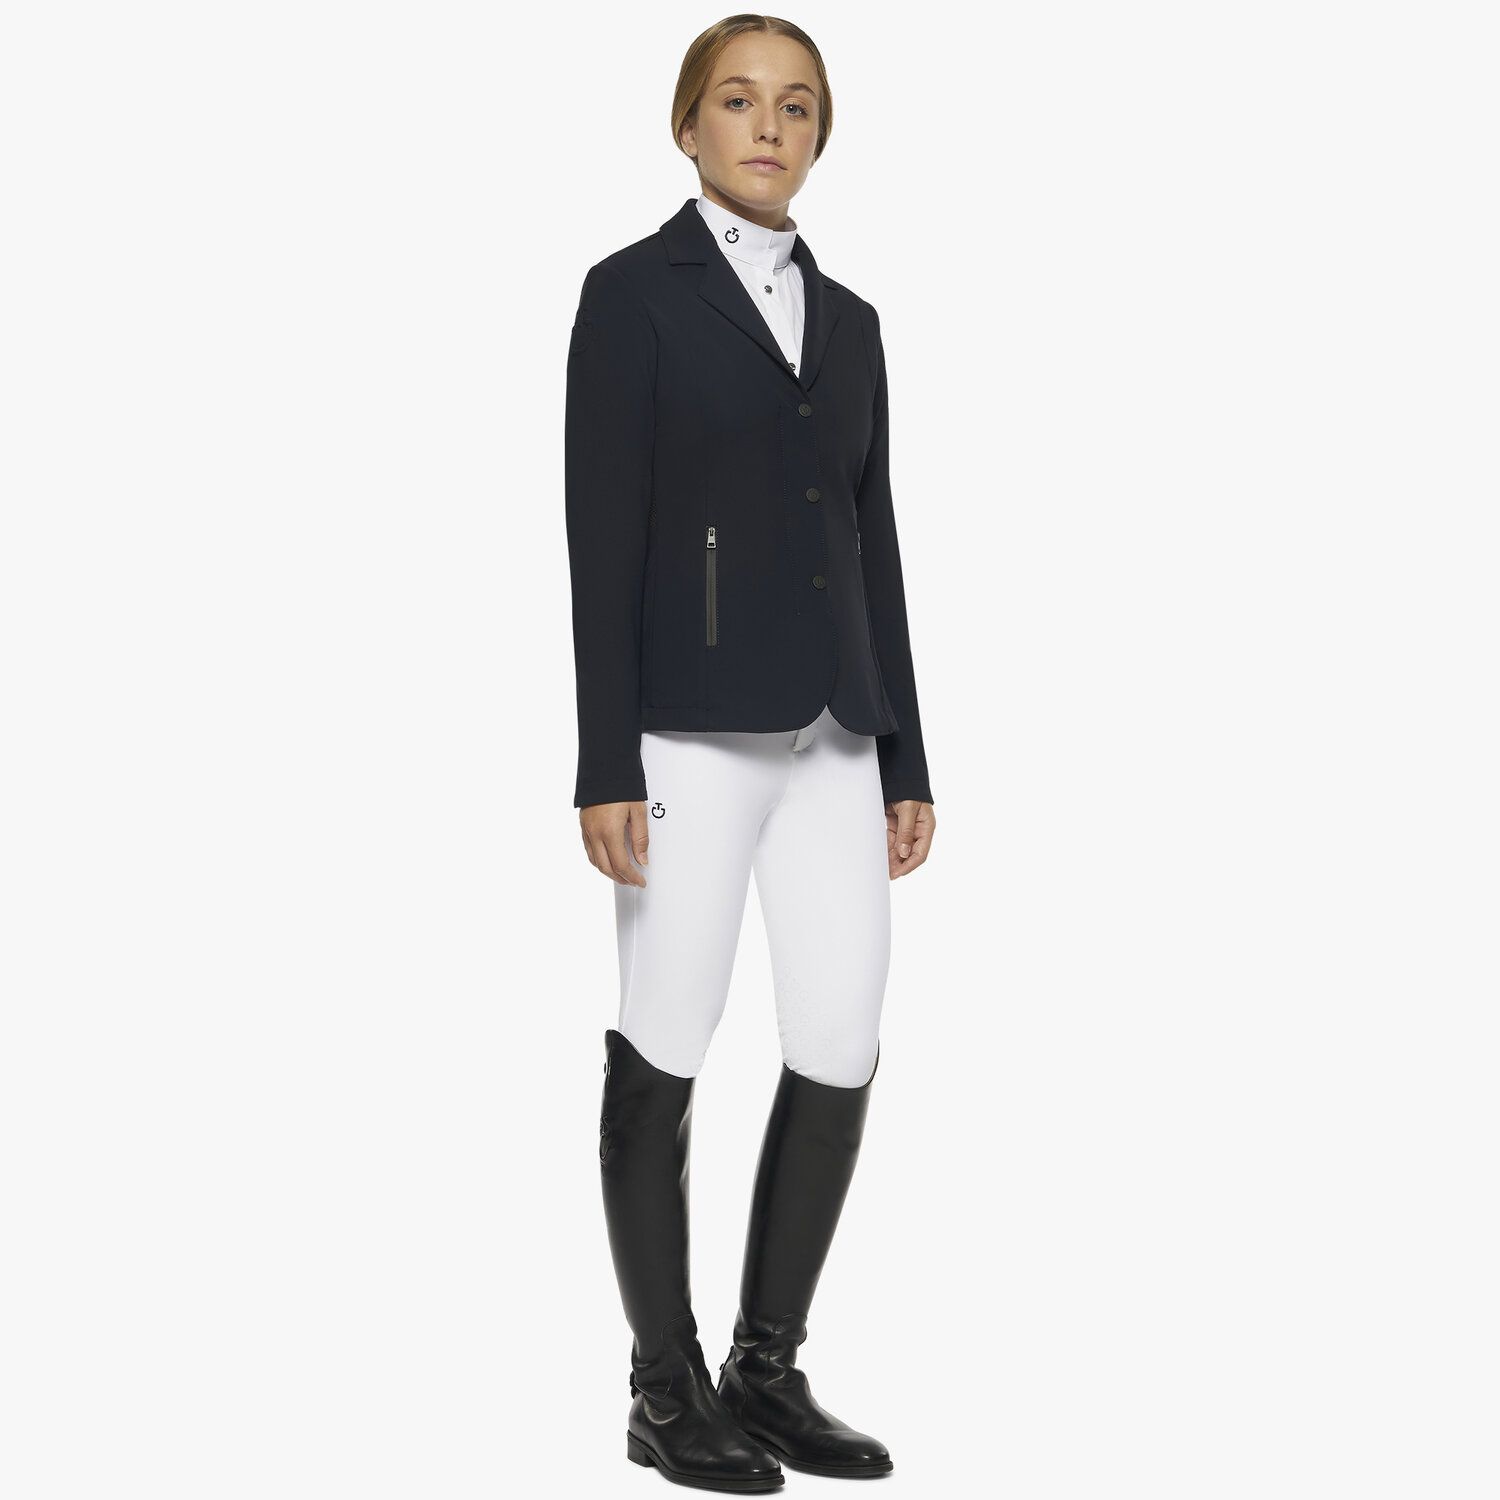 Cavalleria Toscana Girl's zip riding jacket with technical knit inserts NAVY-2